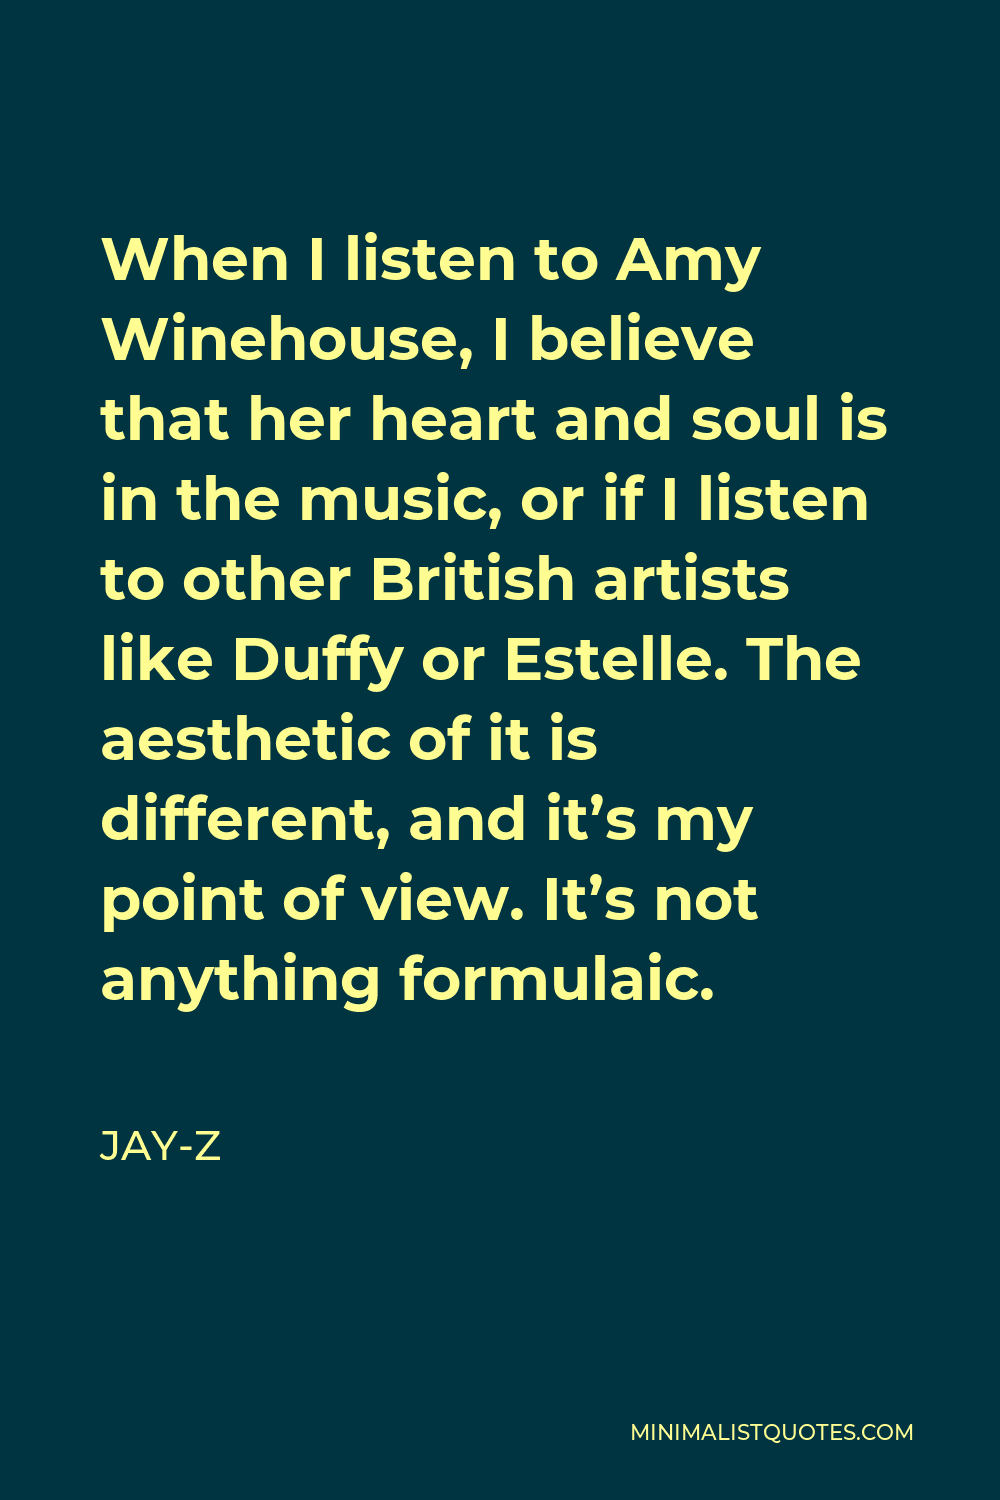 Jay-Z Quote - When I listen to Amy Winehouse, I believe that her heart and soul is in the music, or if I listen to other British artists like Duffy or Estelle. The aesthetic of it is different, and it’s my point of view. It’s not anything formulaic.